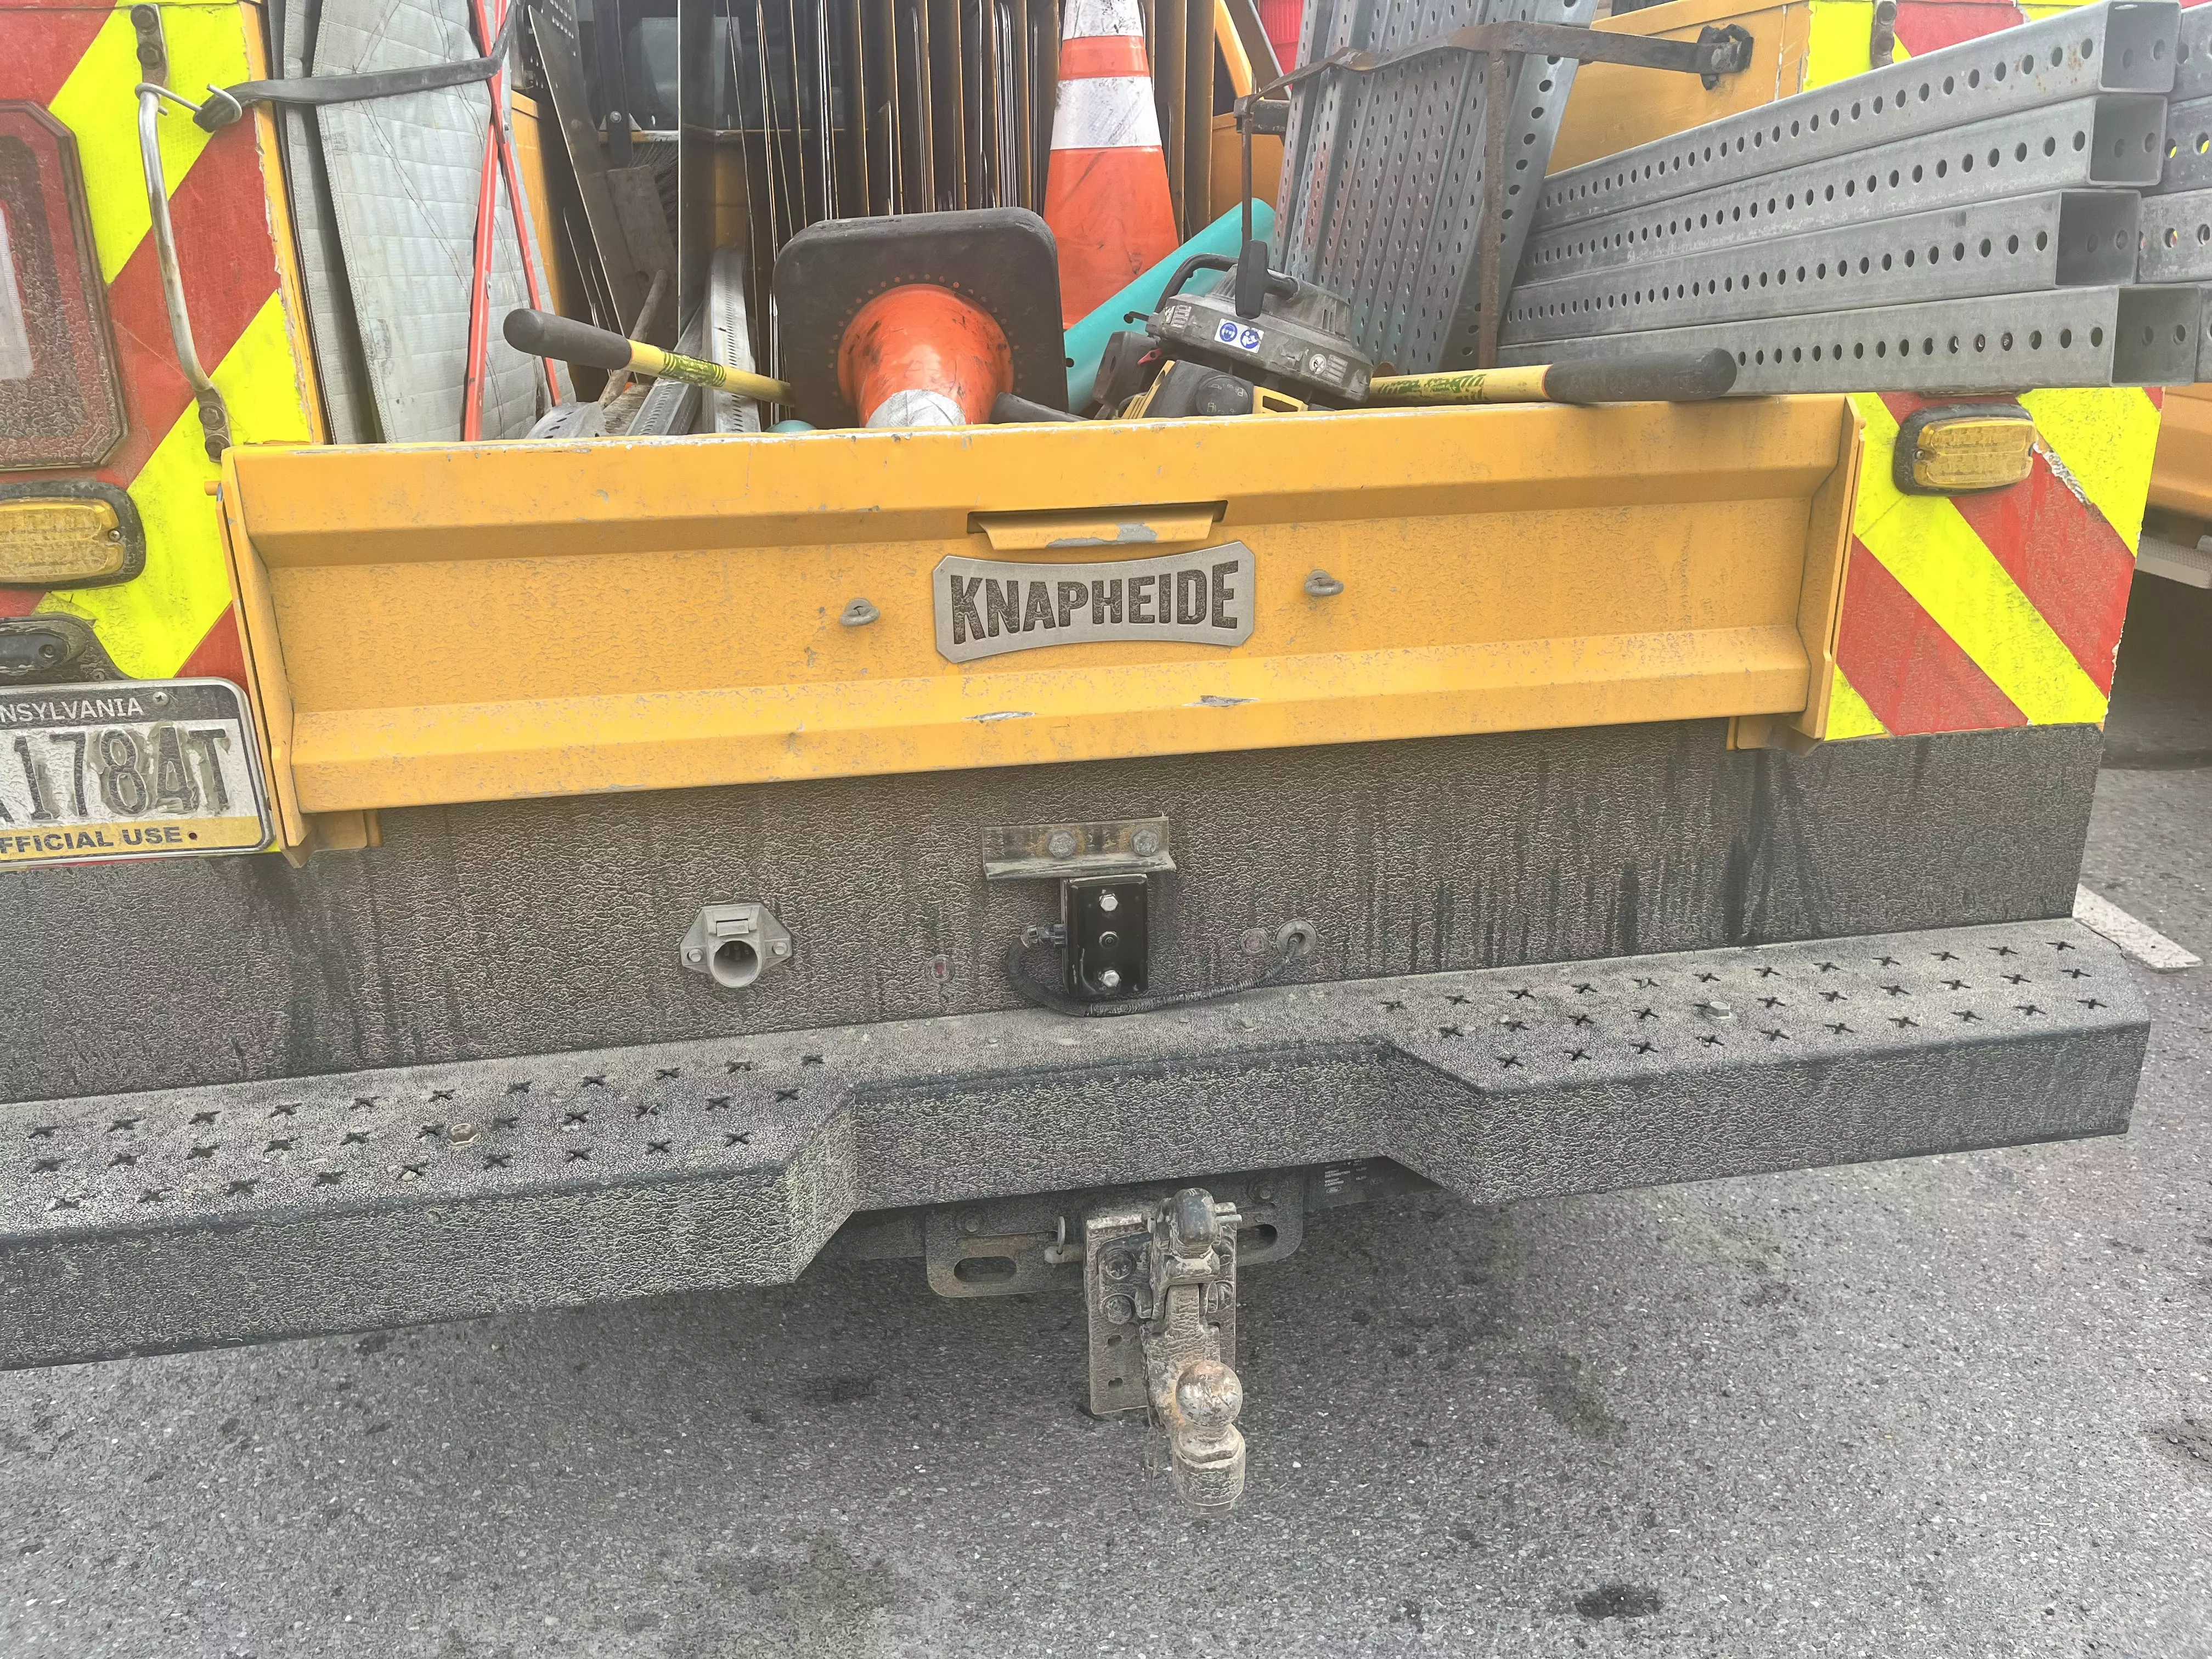 An image showing a rear view of a yellow PennDOT crew cab pickup truck with the new back-up camera attached above the truck's license plate.